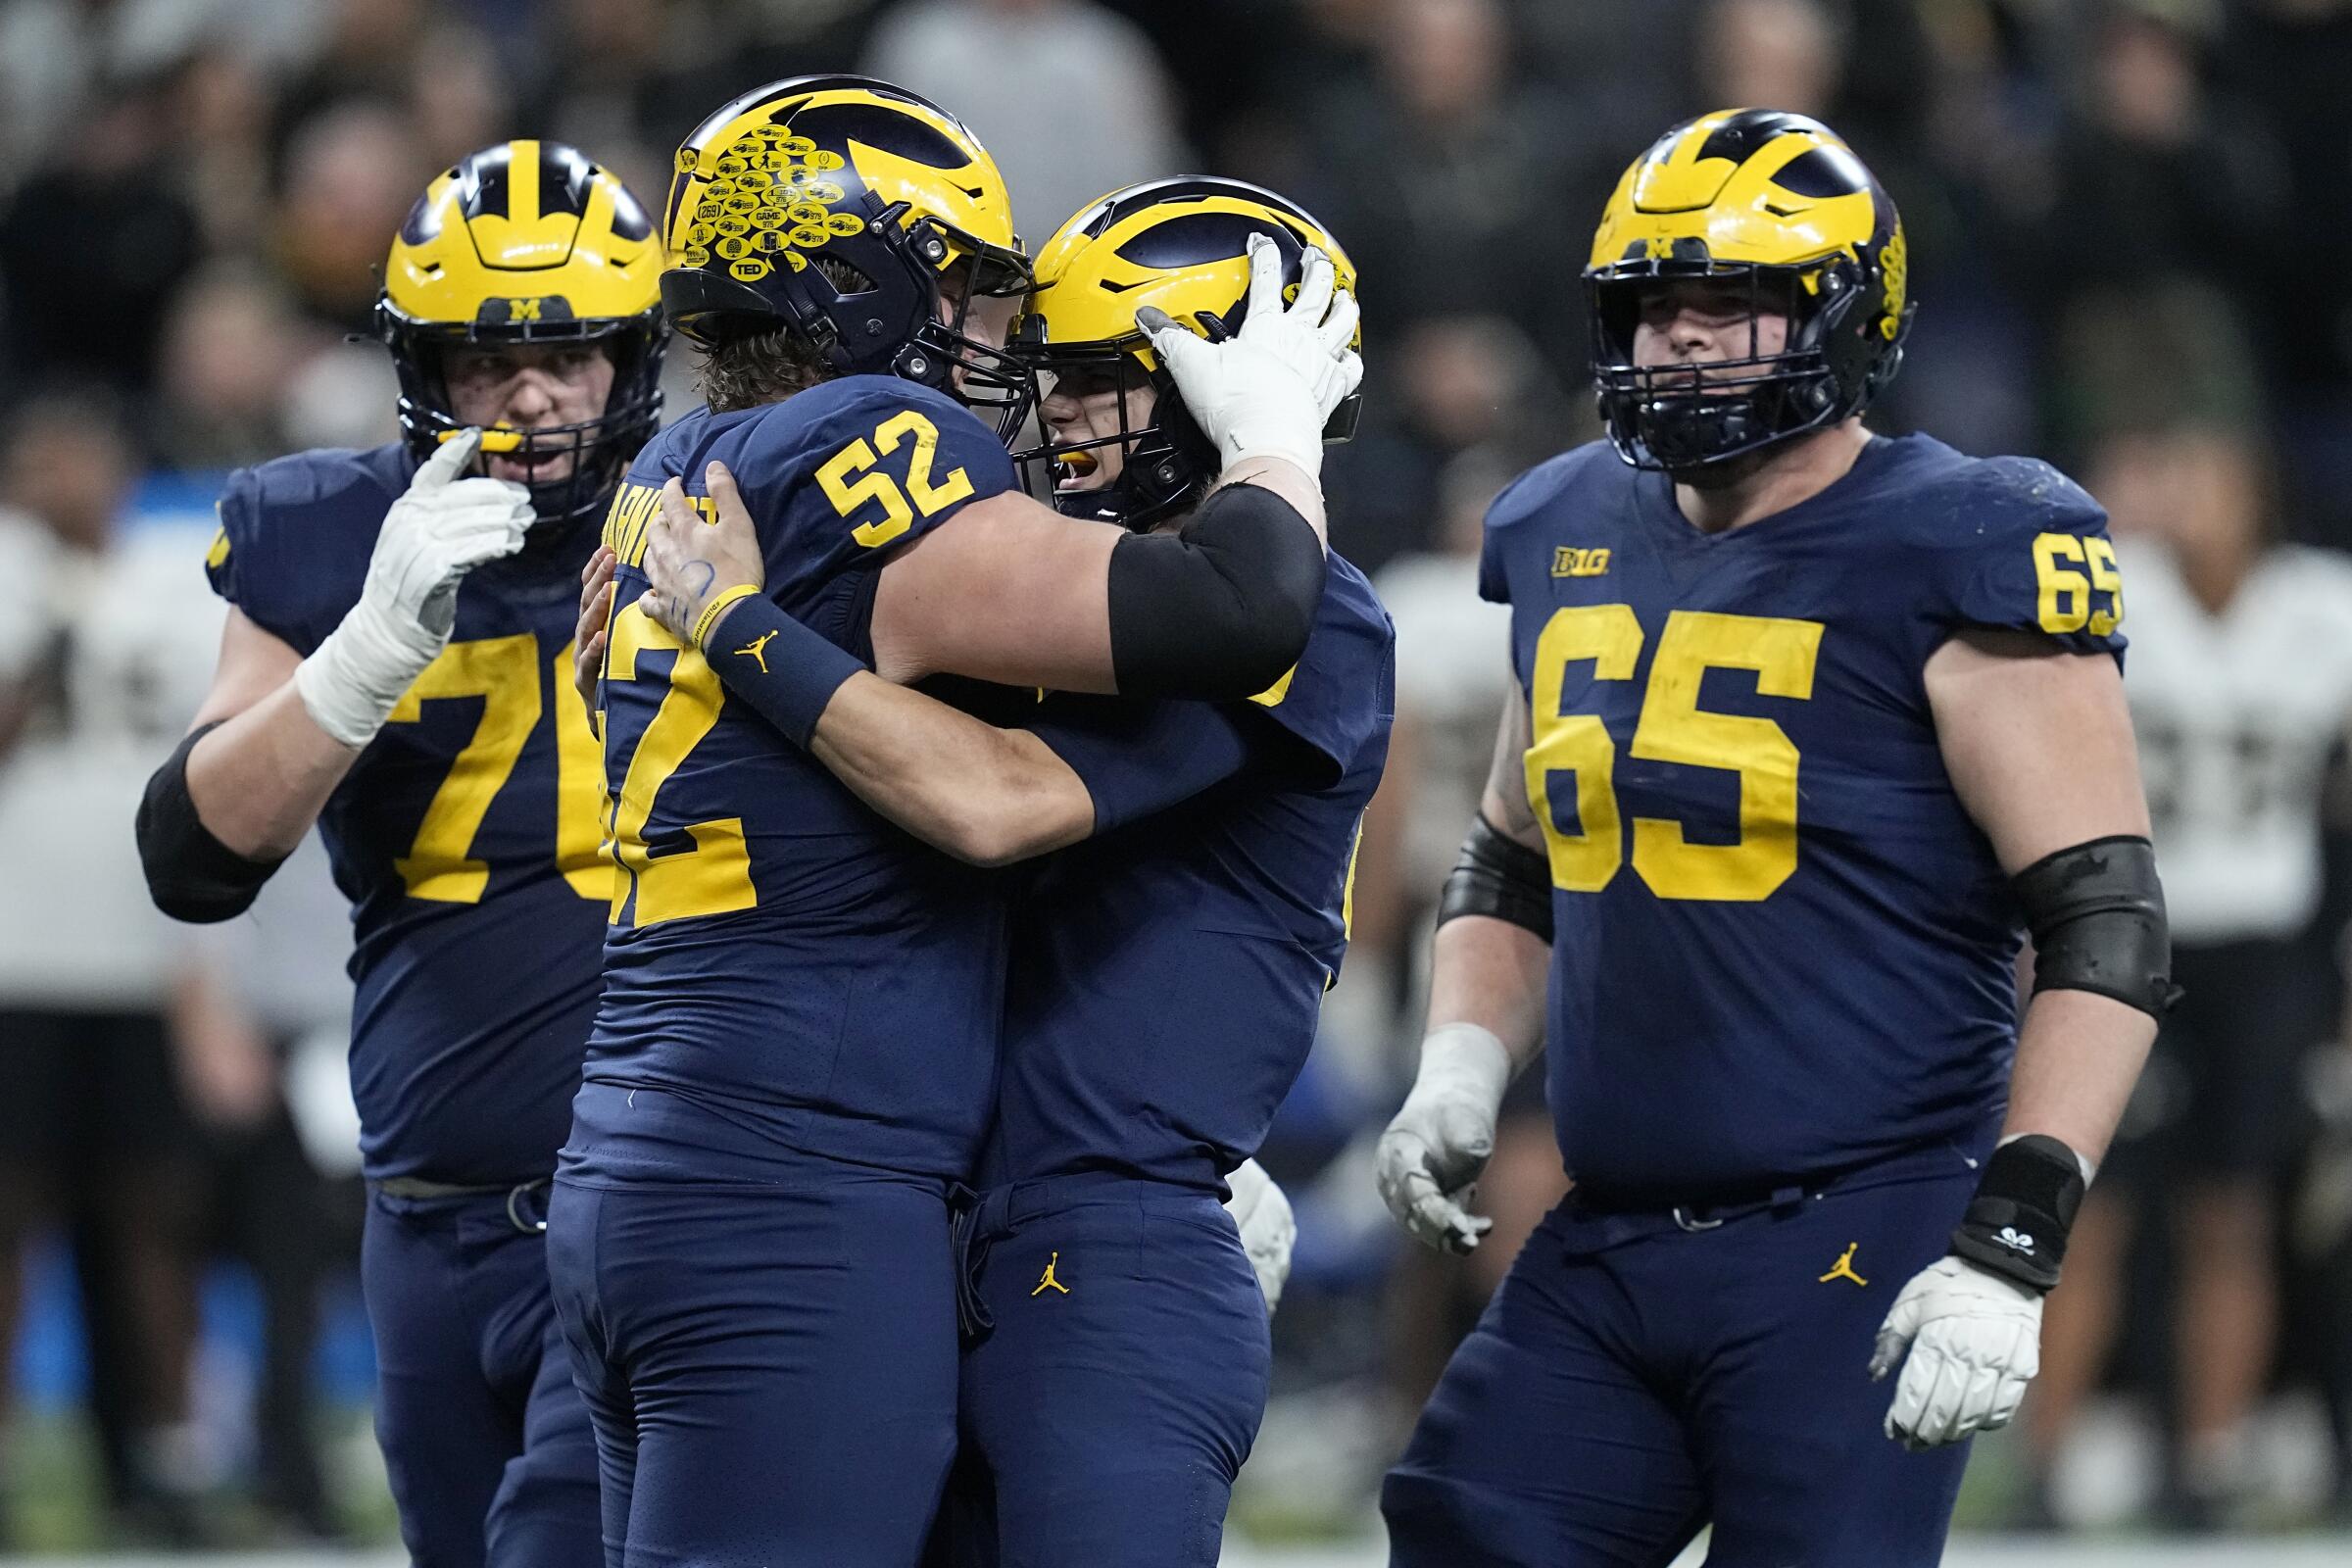 Michigan quarterback J.J. McCarthy, center, celebrates with his offensive linemen after throwing a touchdown pass.